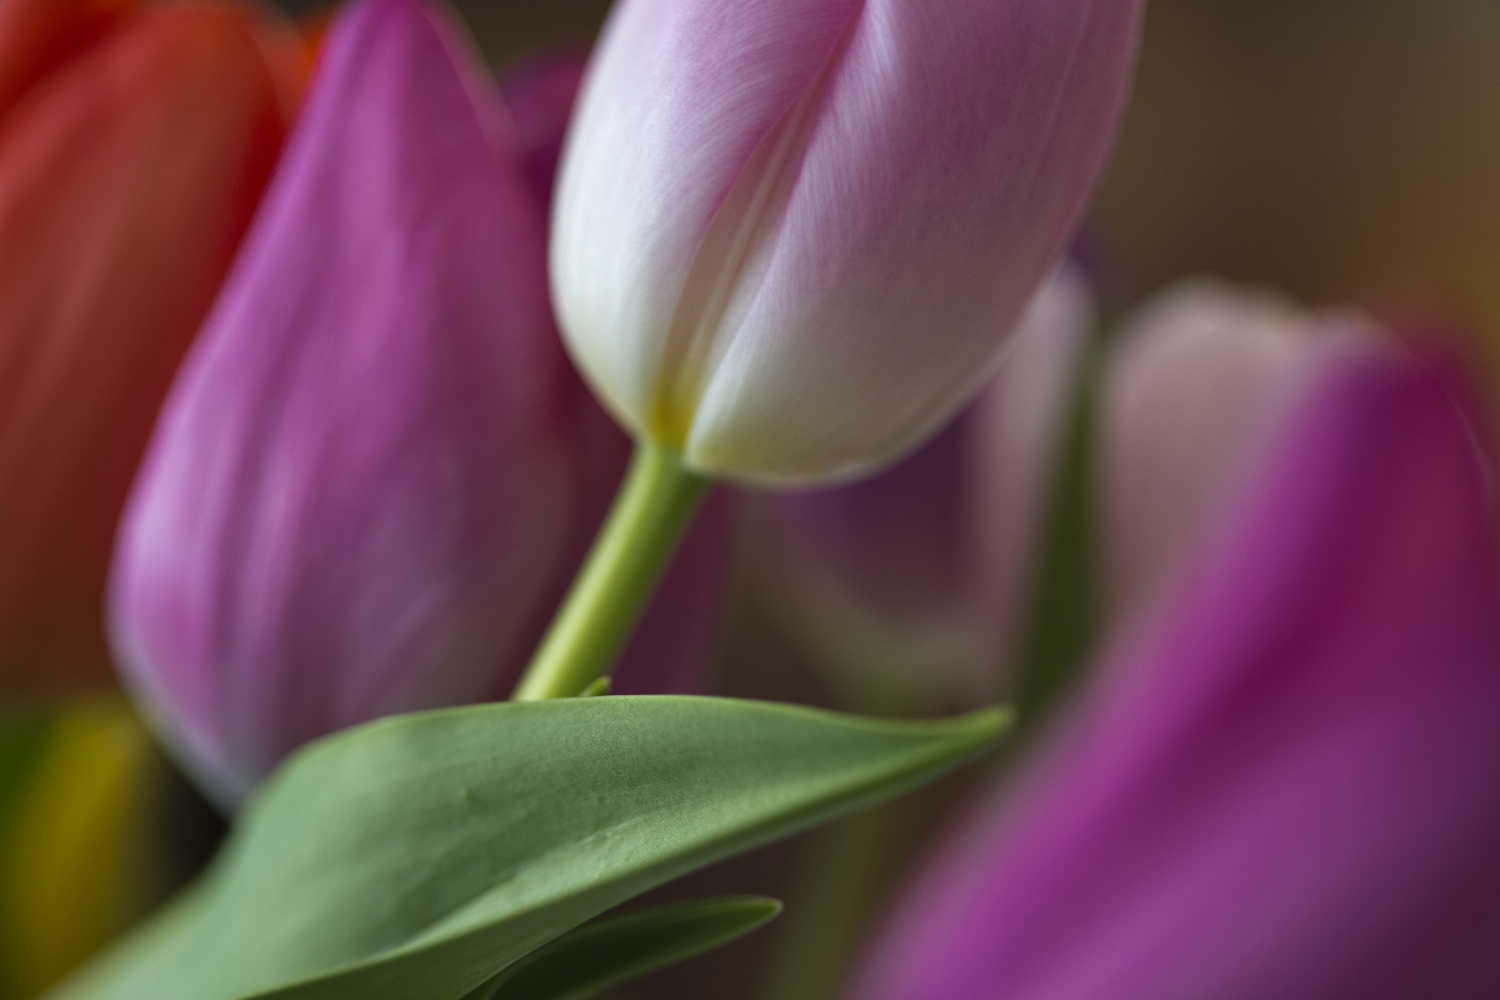 amys_many_colored_tulips_03-01-16_4247.jpg